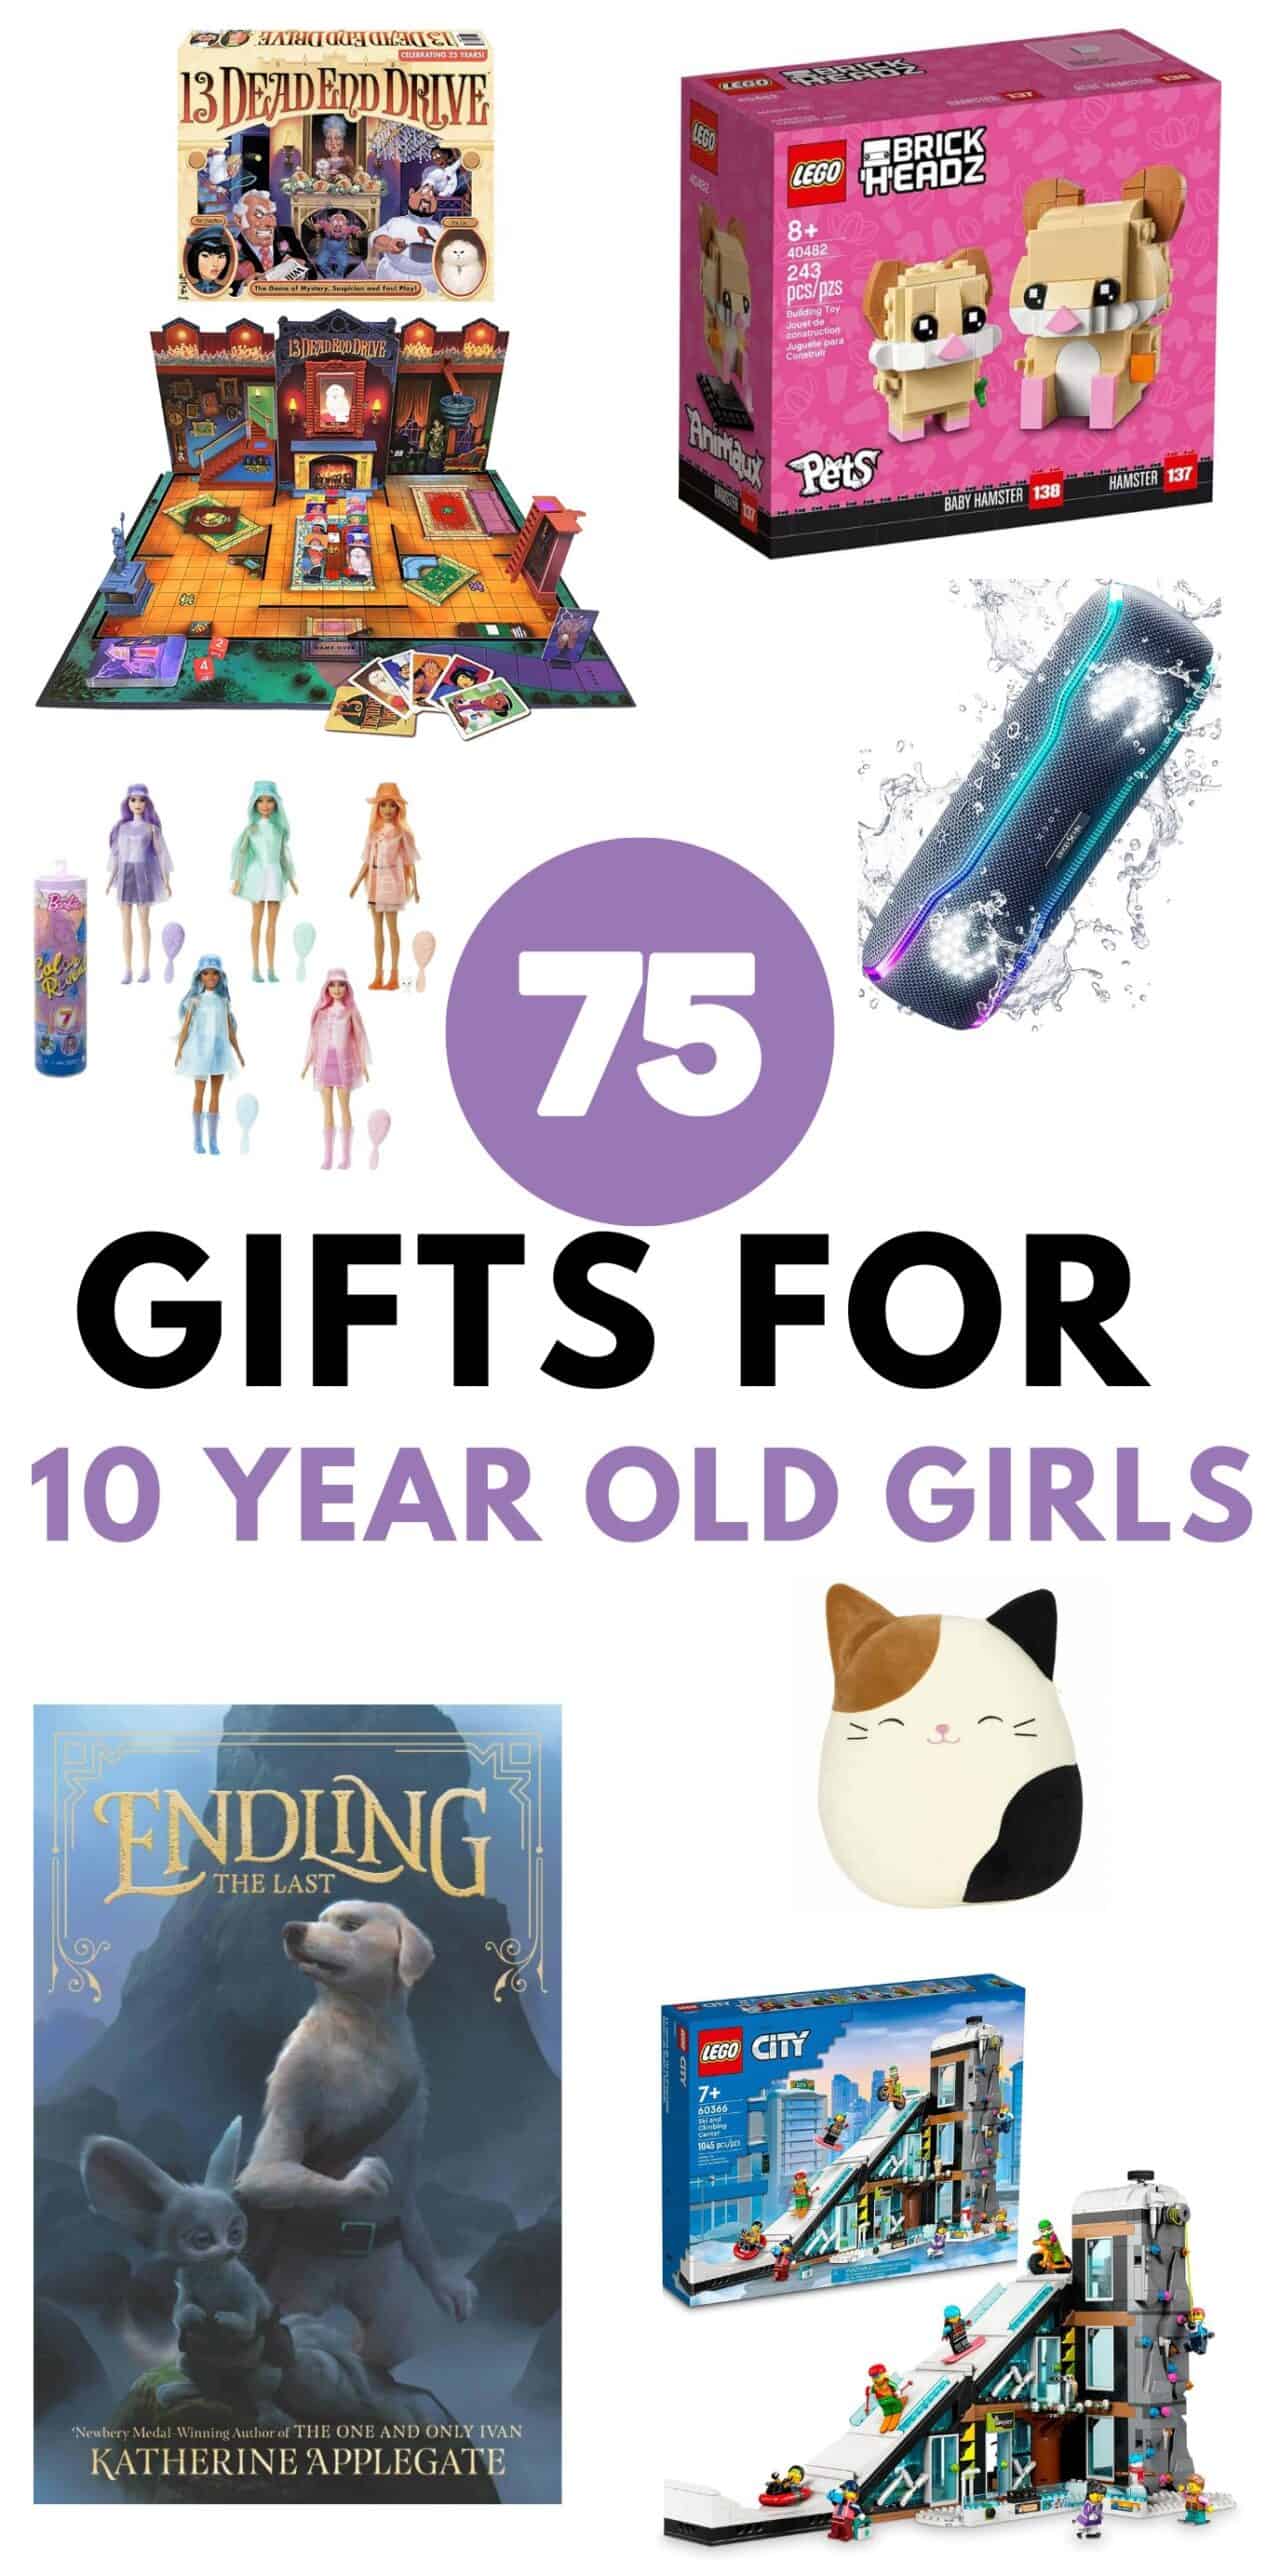 GIFTS FOR 10 YEAR OLD GIRLS